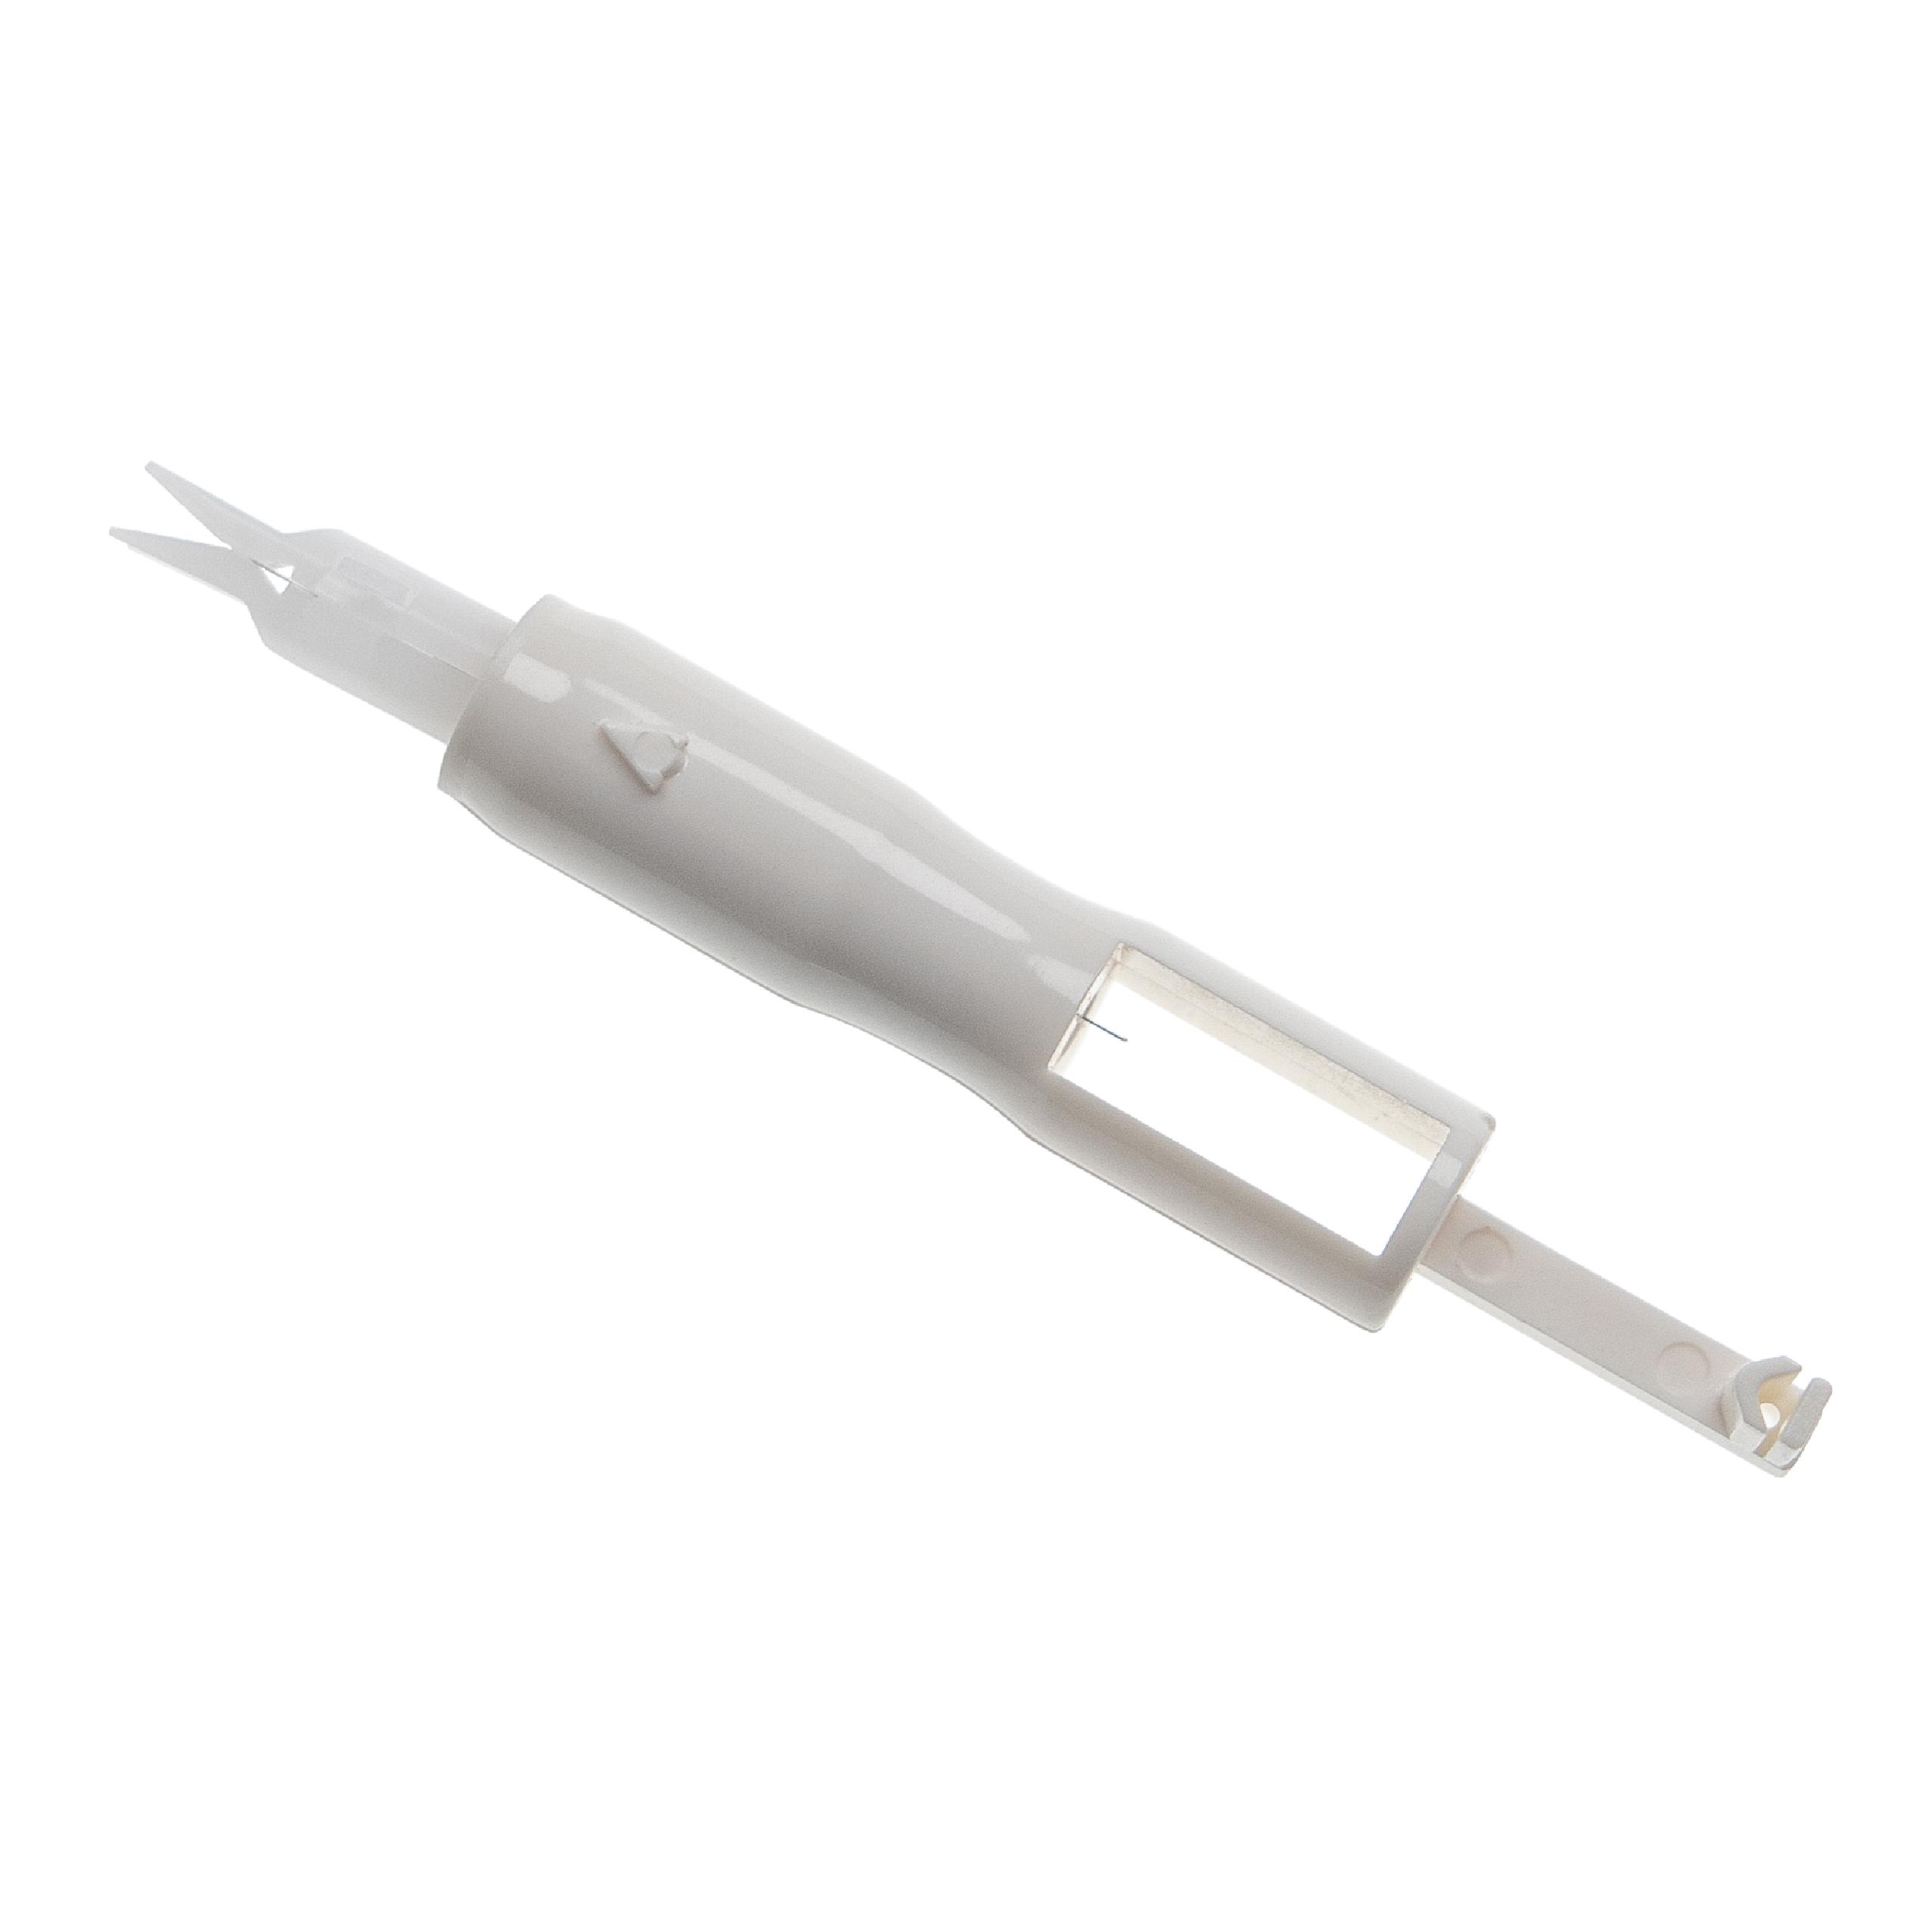 vhbw Needle Threader for Domestic Sewing Machines - Plastic, Length 7 cm White